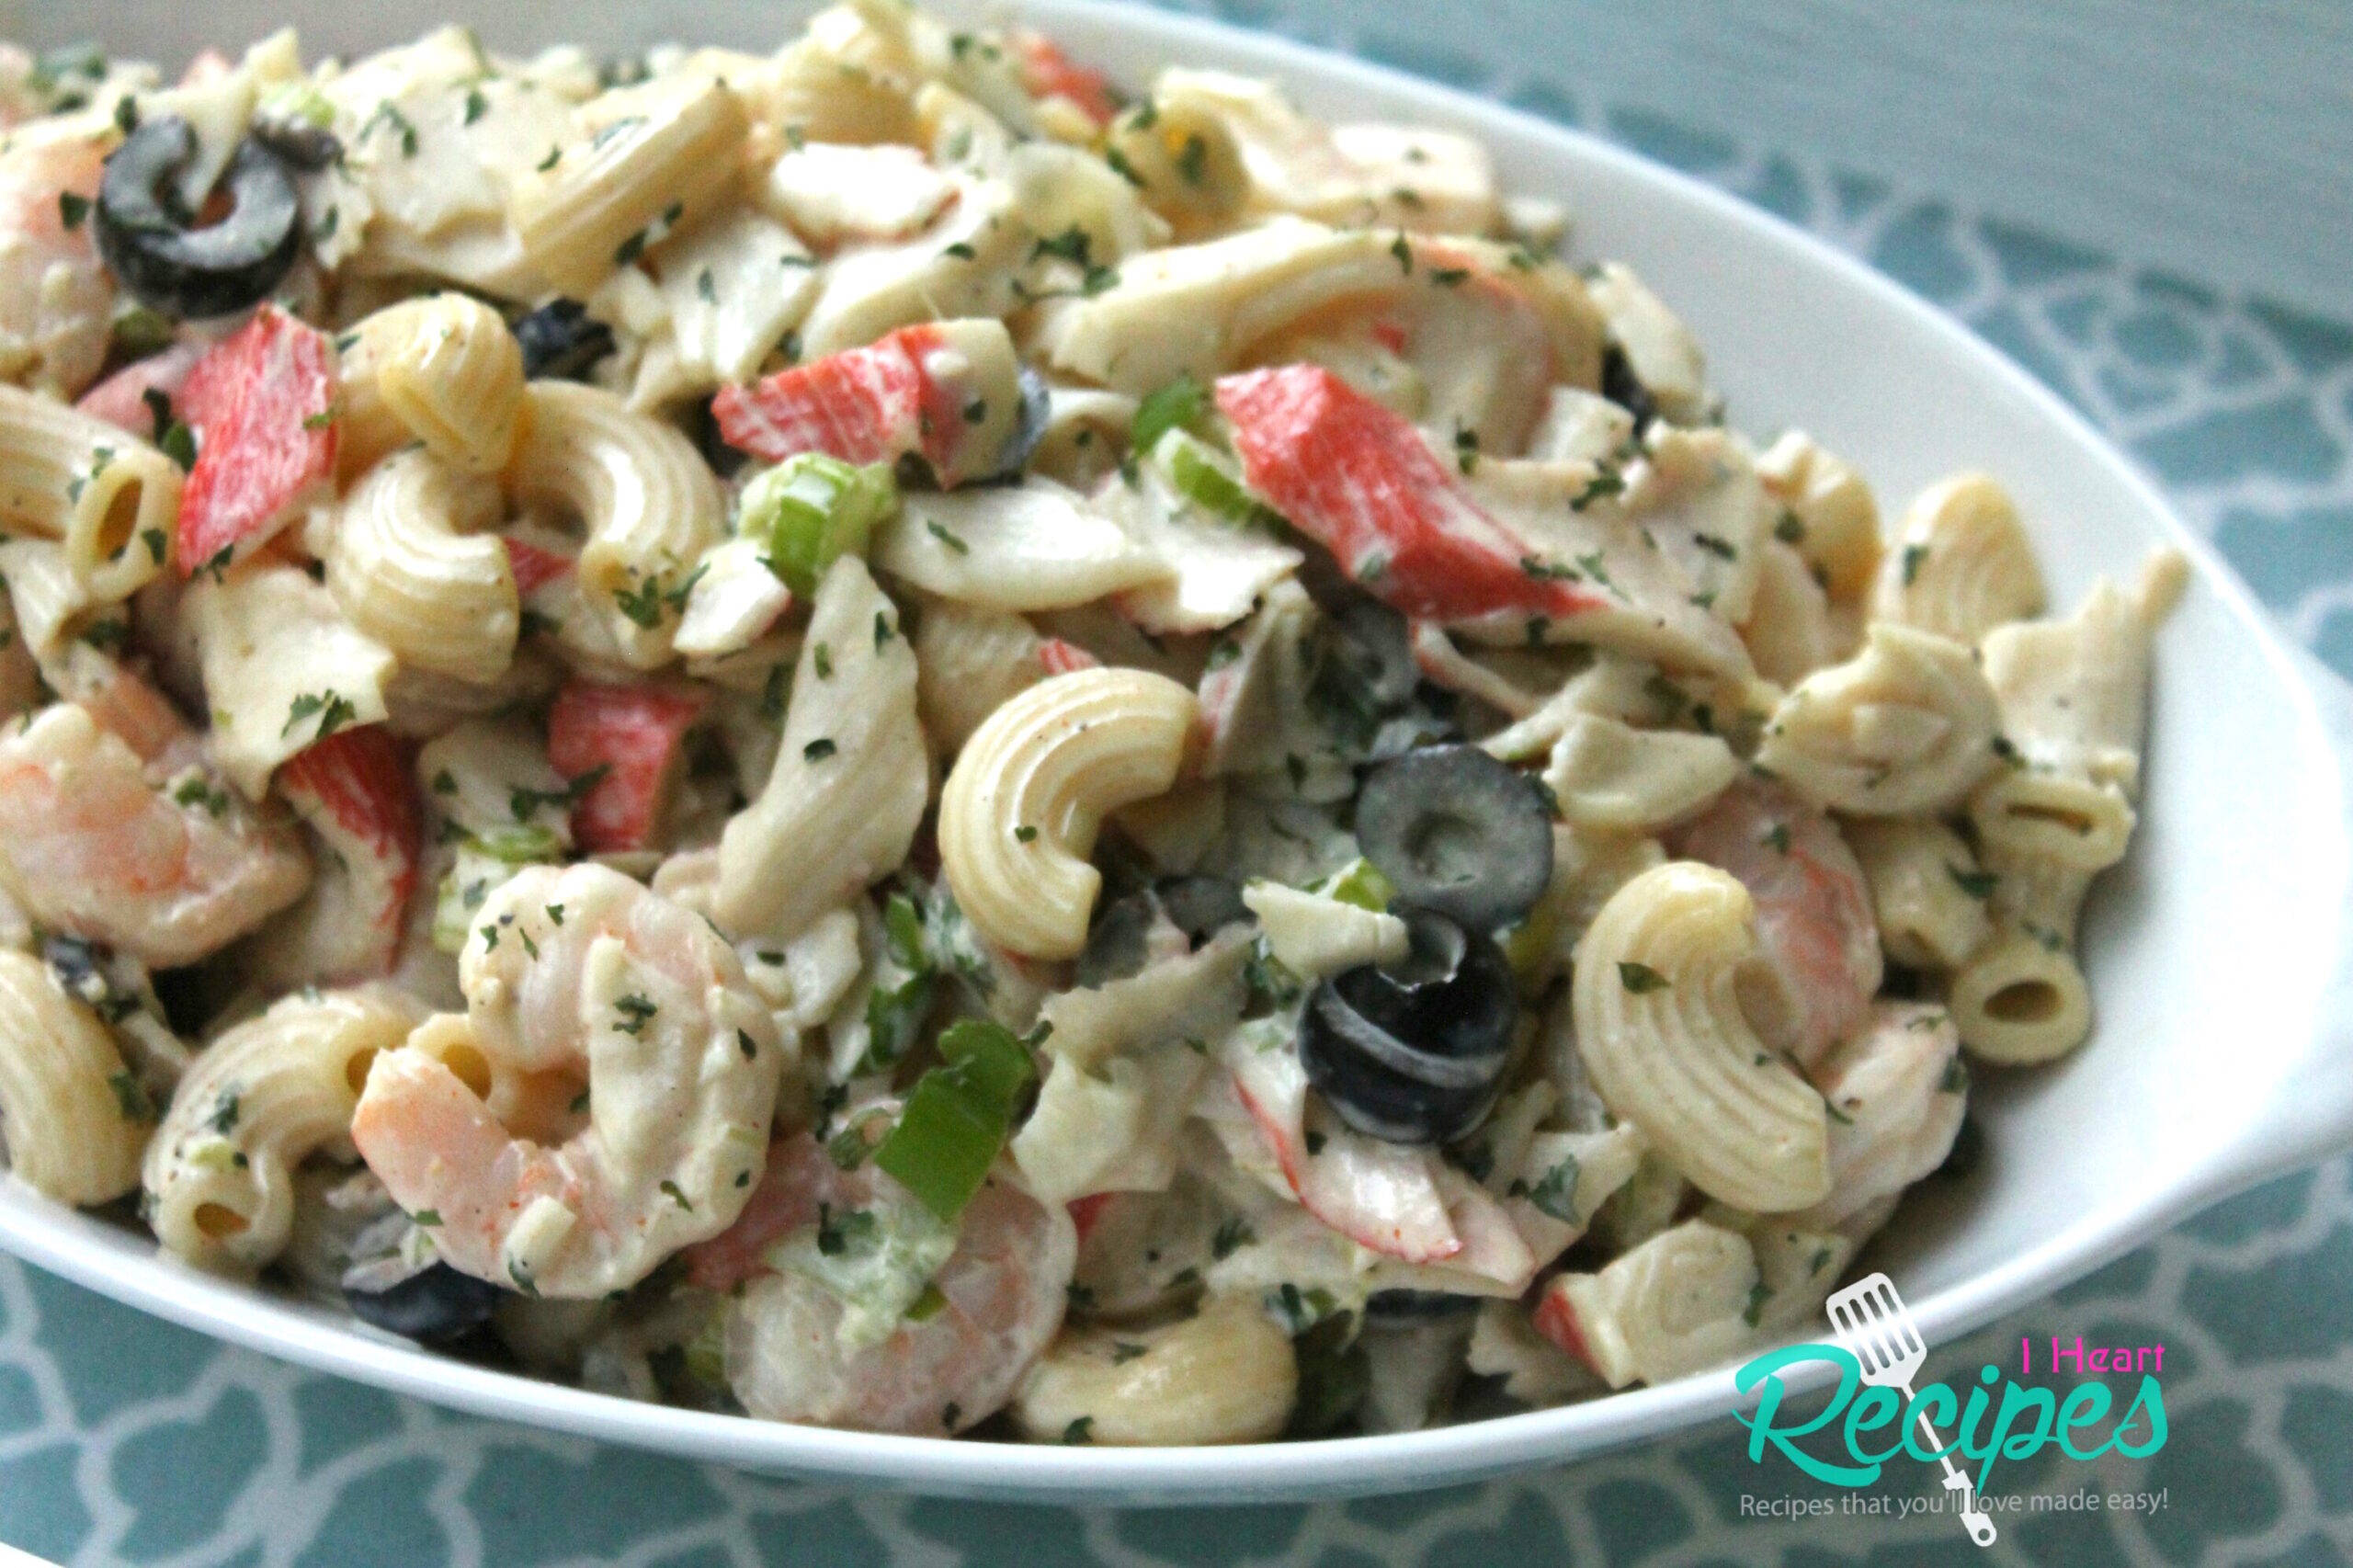 A large white, oval dish is filled with creamy seafood salad. Chunks of crab meat, shrimp, pasta, and veggies are mixed with a creamy mayonnaise dressing.